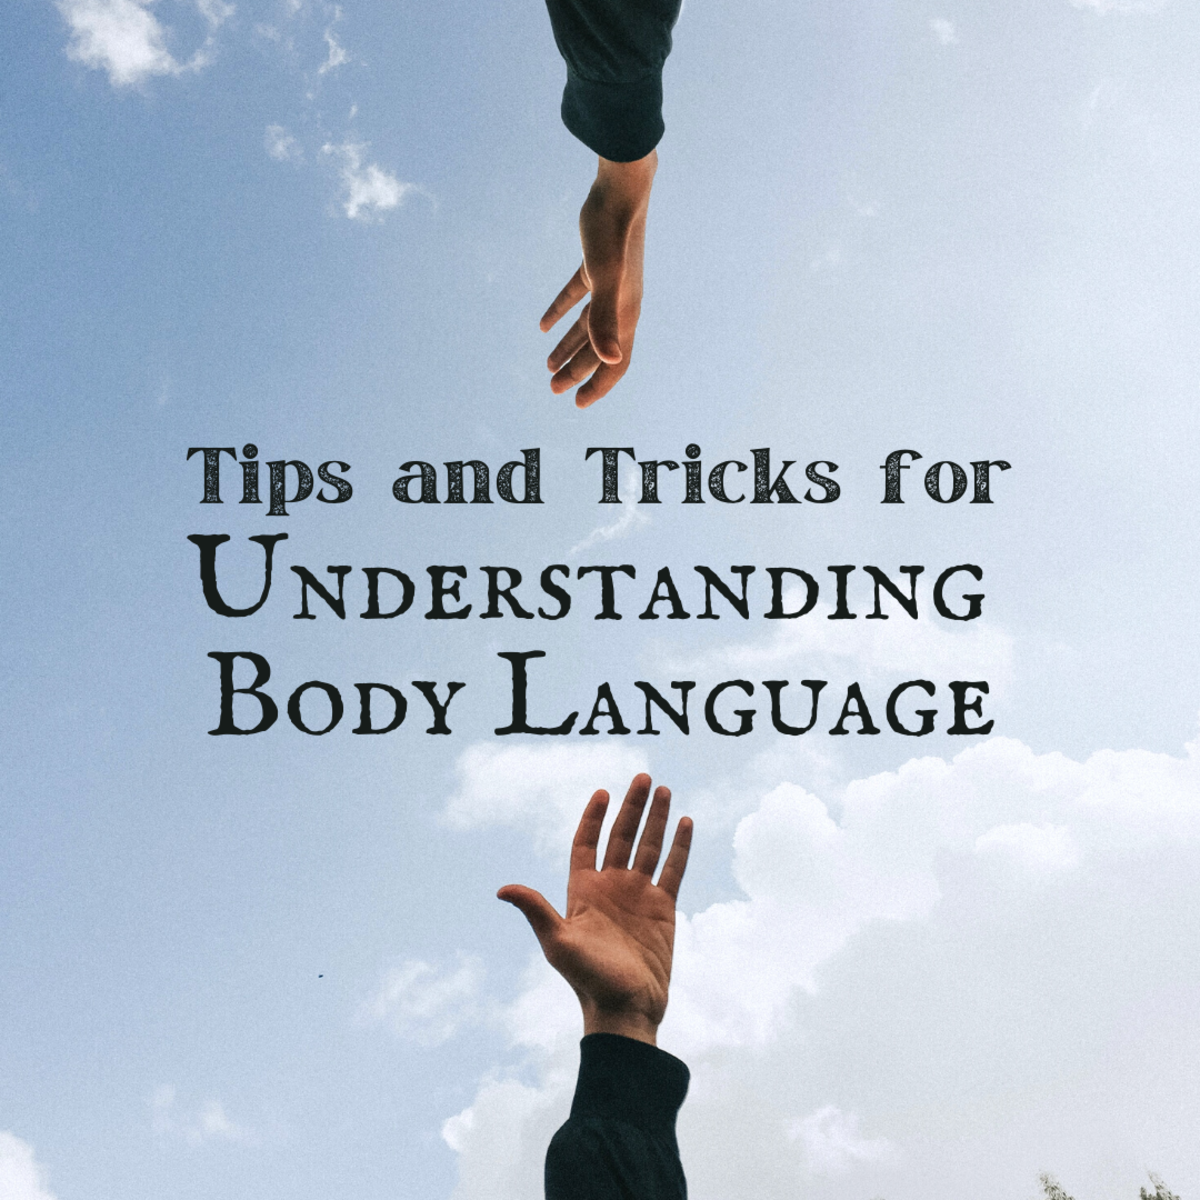 Learn a few tips and tricks for understanding nonverbal communication—body language is everything!